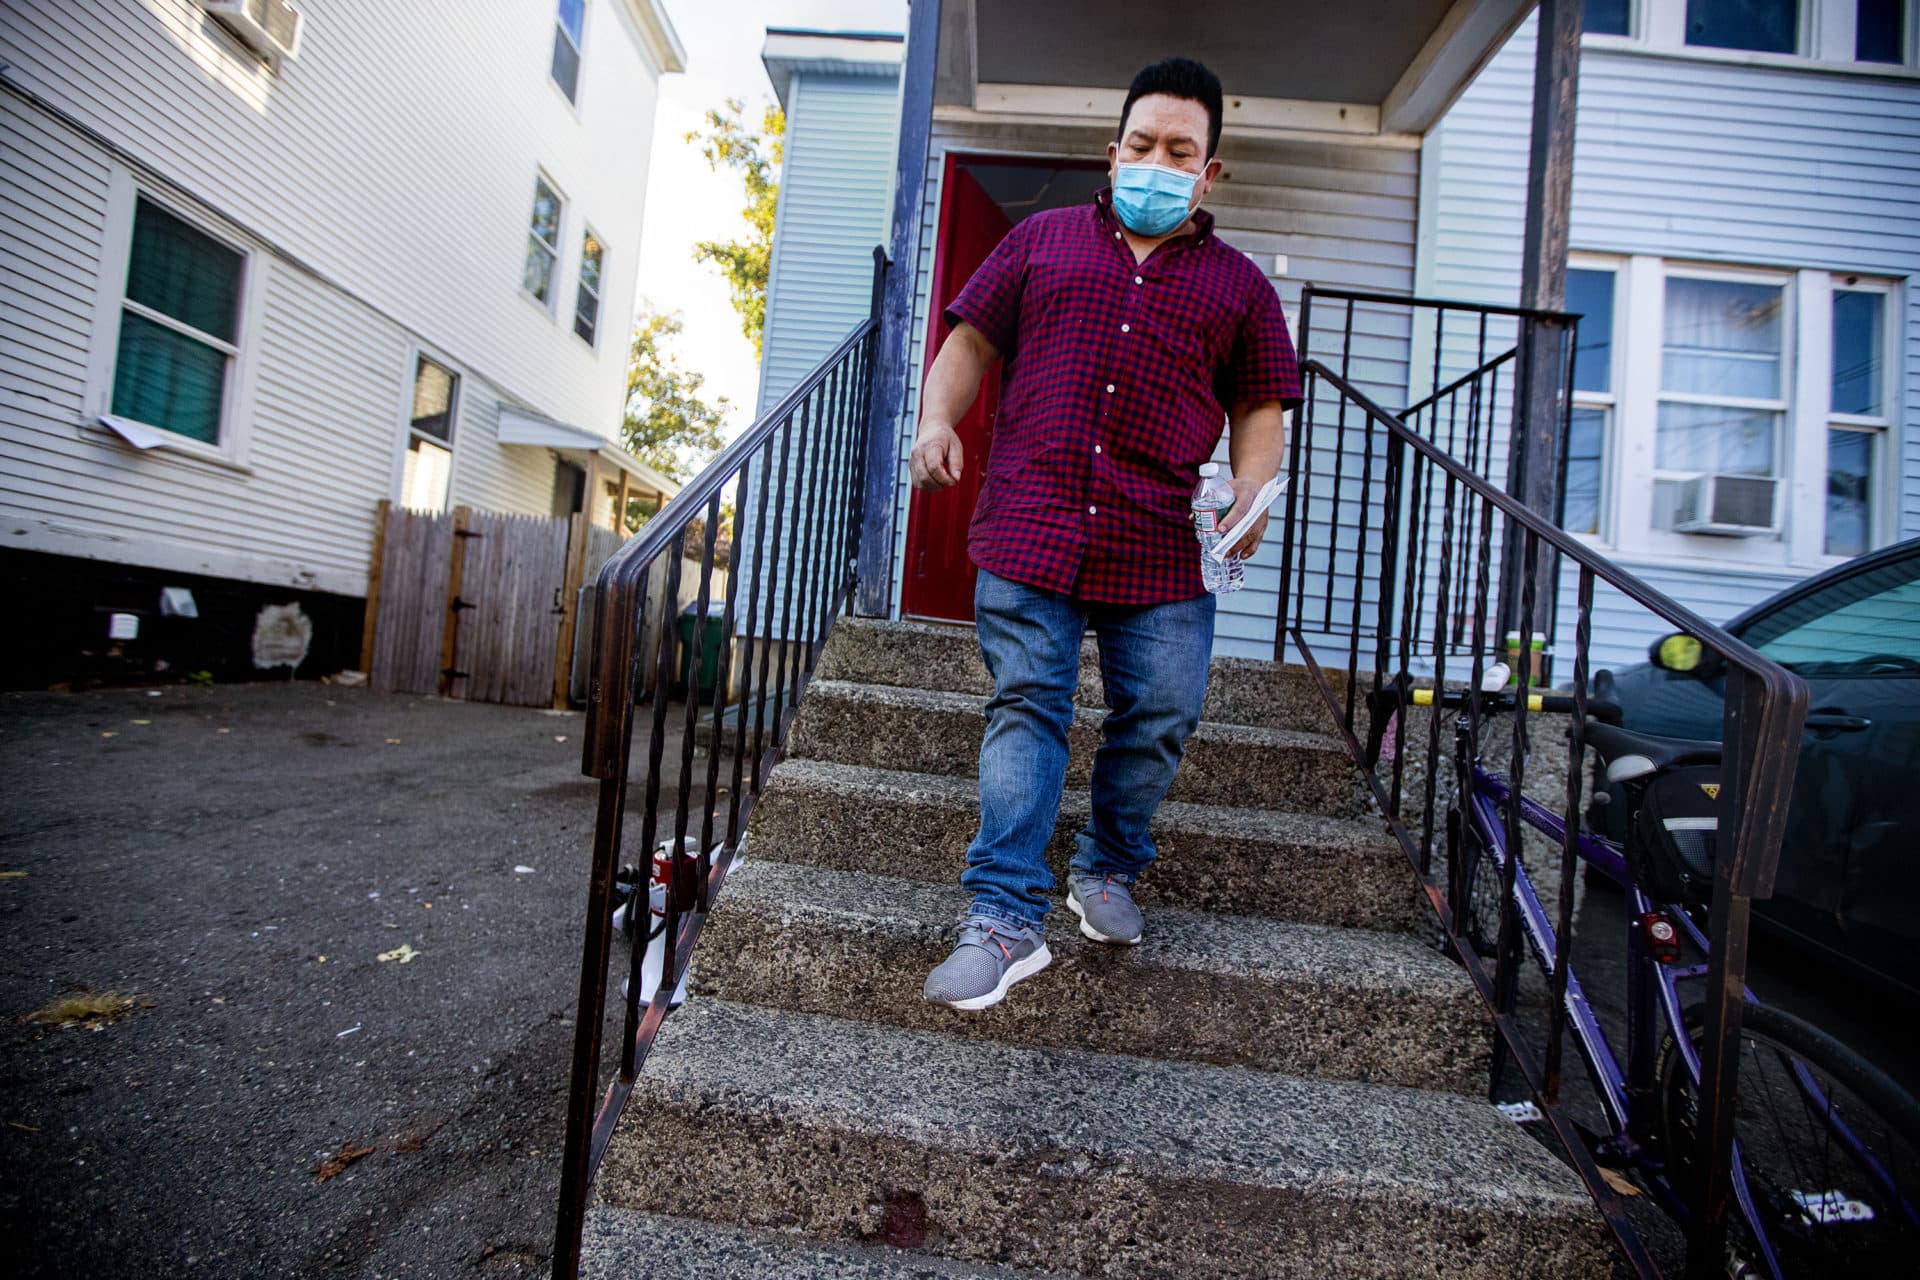 After Robelio Gonzalez stopped paying rent, he says his landlord threatened to call immigration. The landlord denies saying it. (Jesse Costa/WBUR)